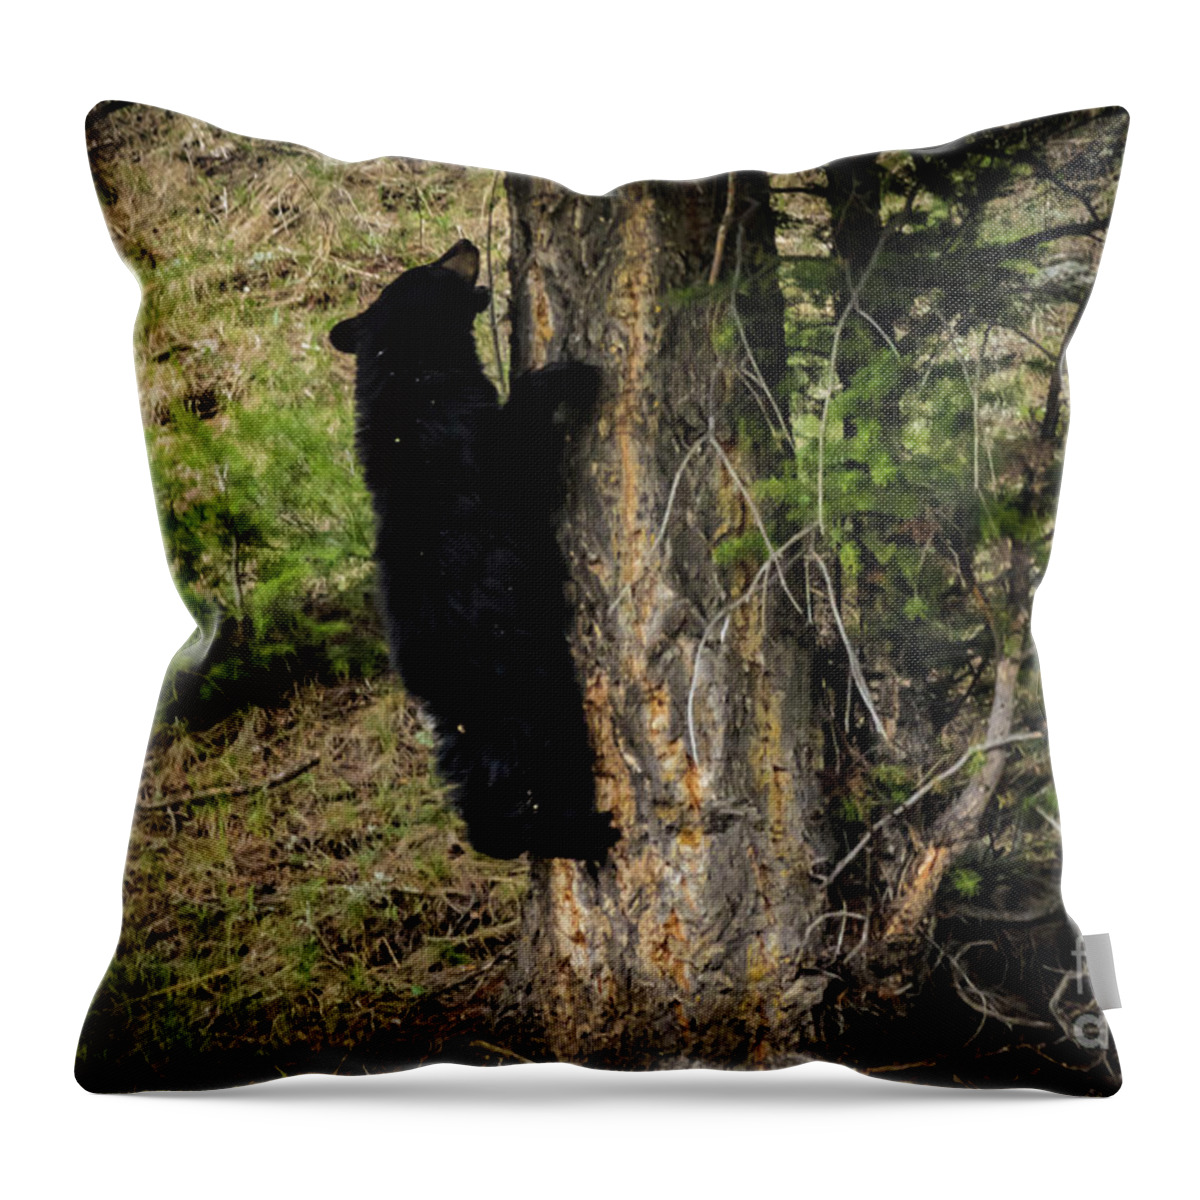 #cubs Throw Pillow featuring the photograph Playful Cub by George Kenhan